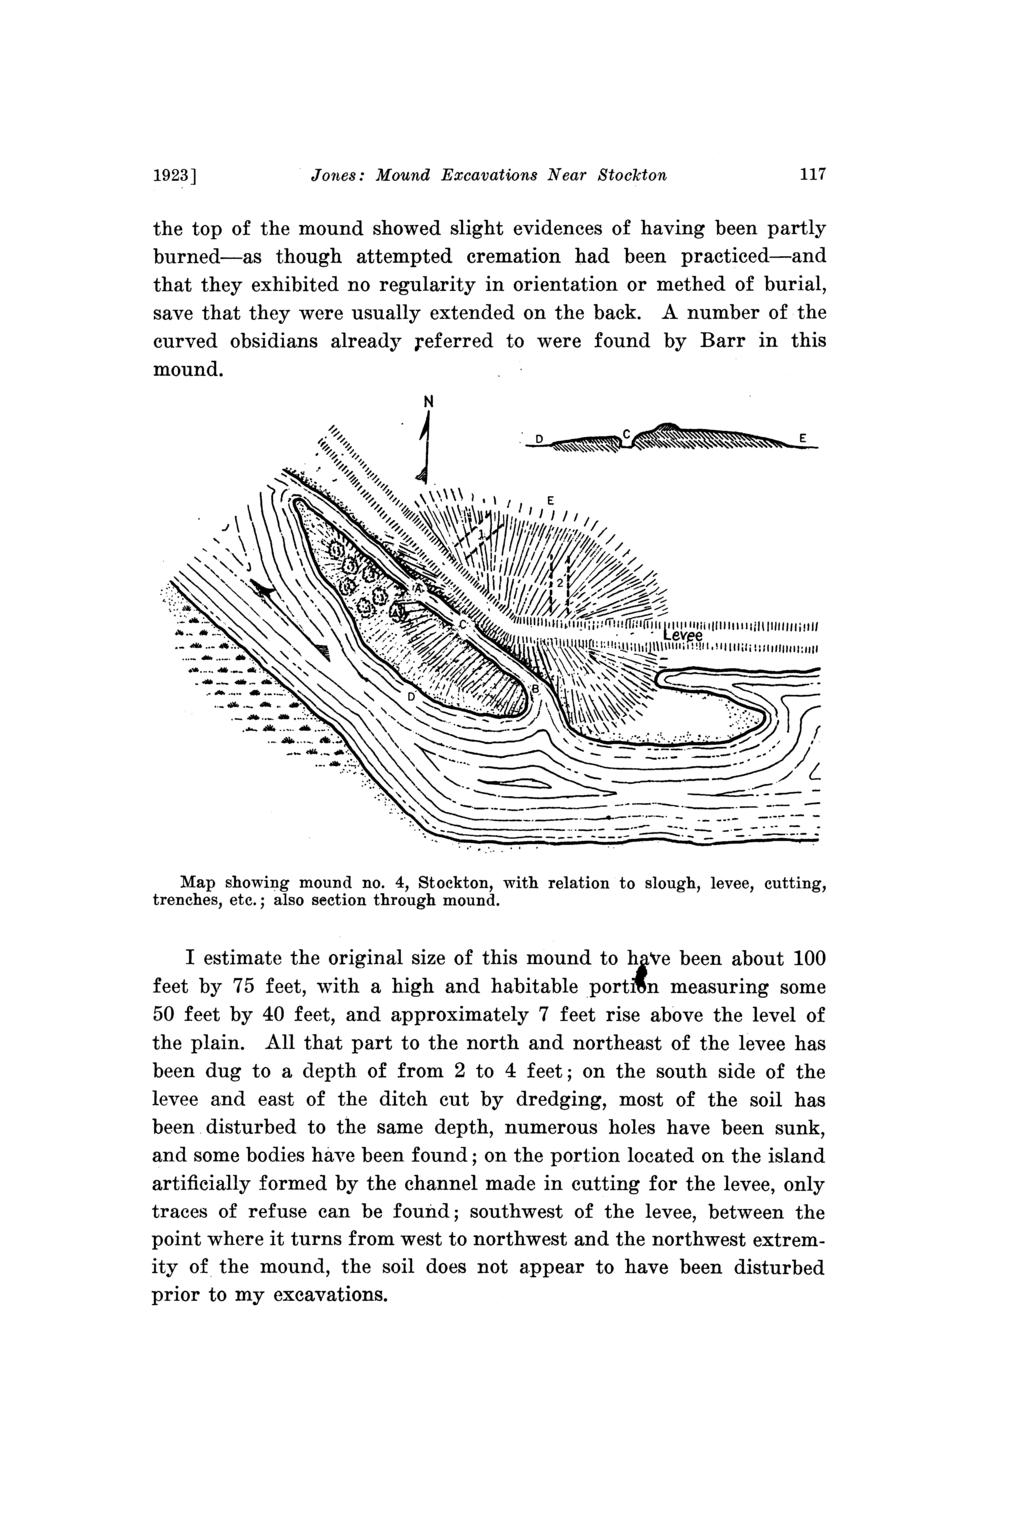 1923] Jones: Mound Excavations Near Stockton 117 the top of the mound showed slight evidences of having been partly burned-as though attempted cremation had been practiced-and that they exhibited no